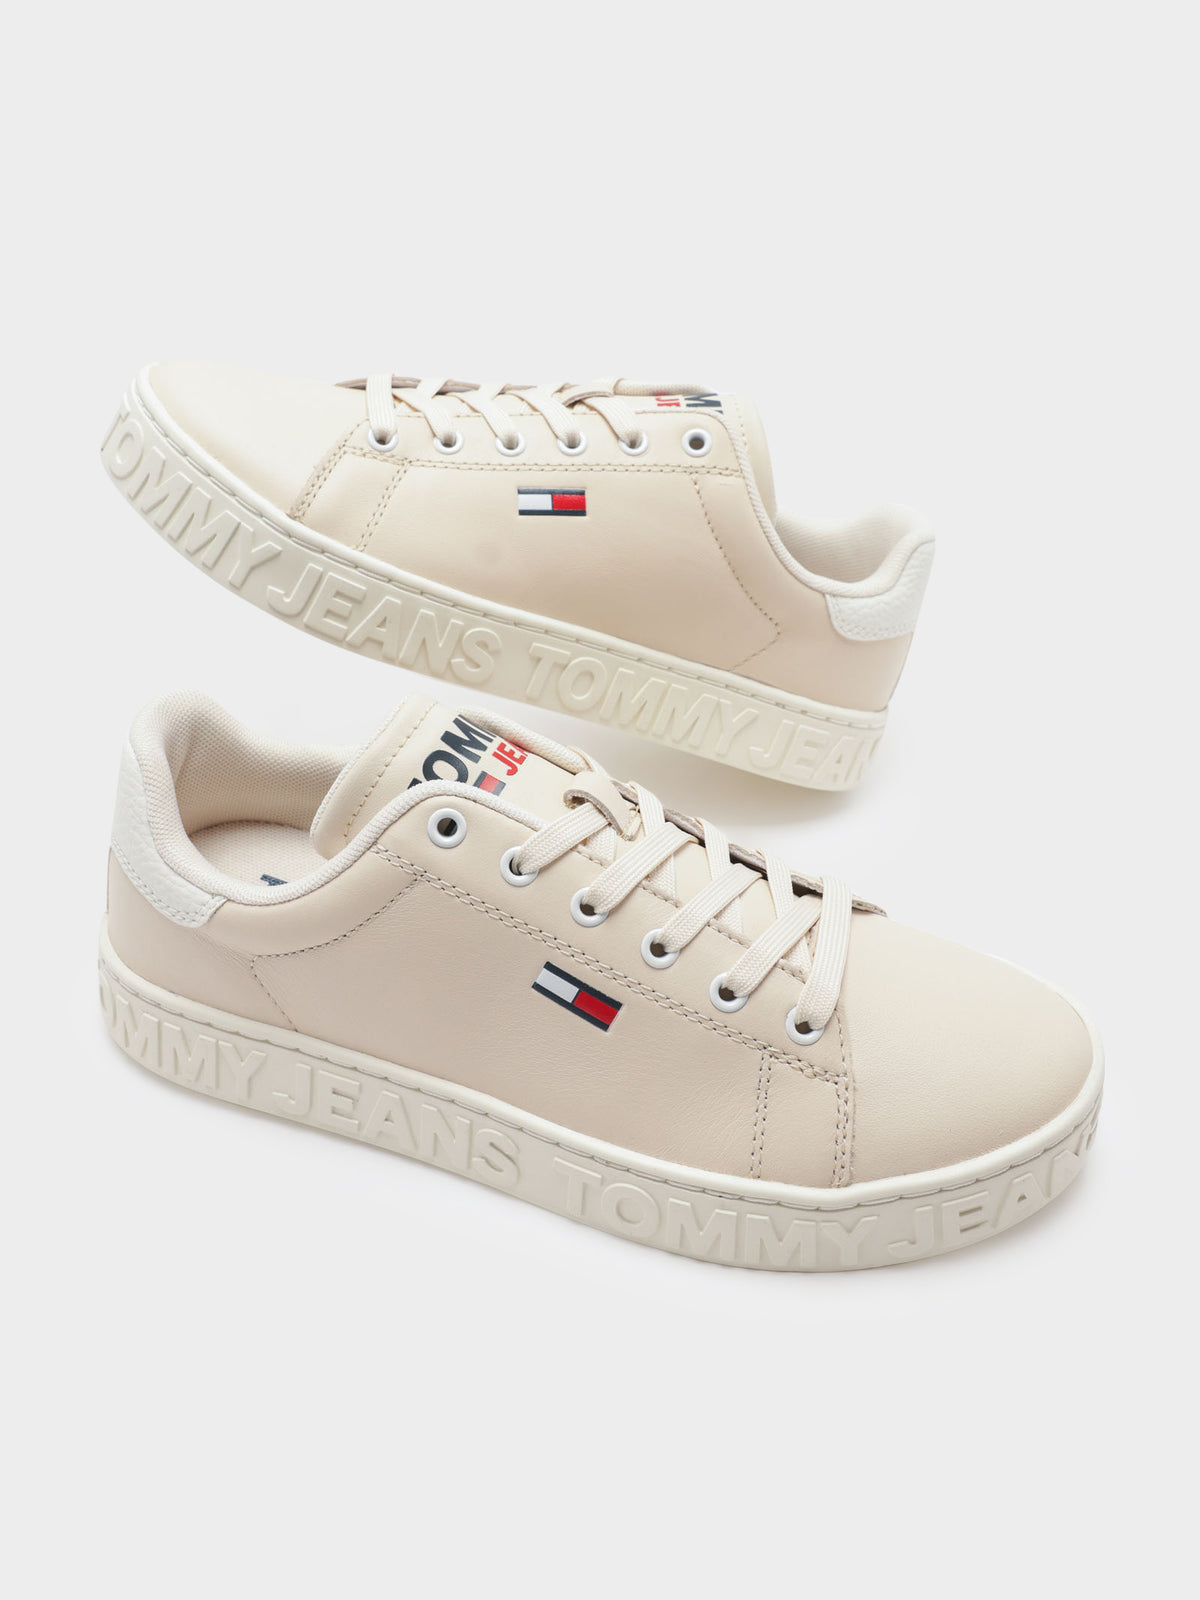 Womens Logo Leather Cupsole Sneakers in Sugarcane Beige